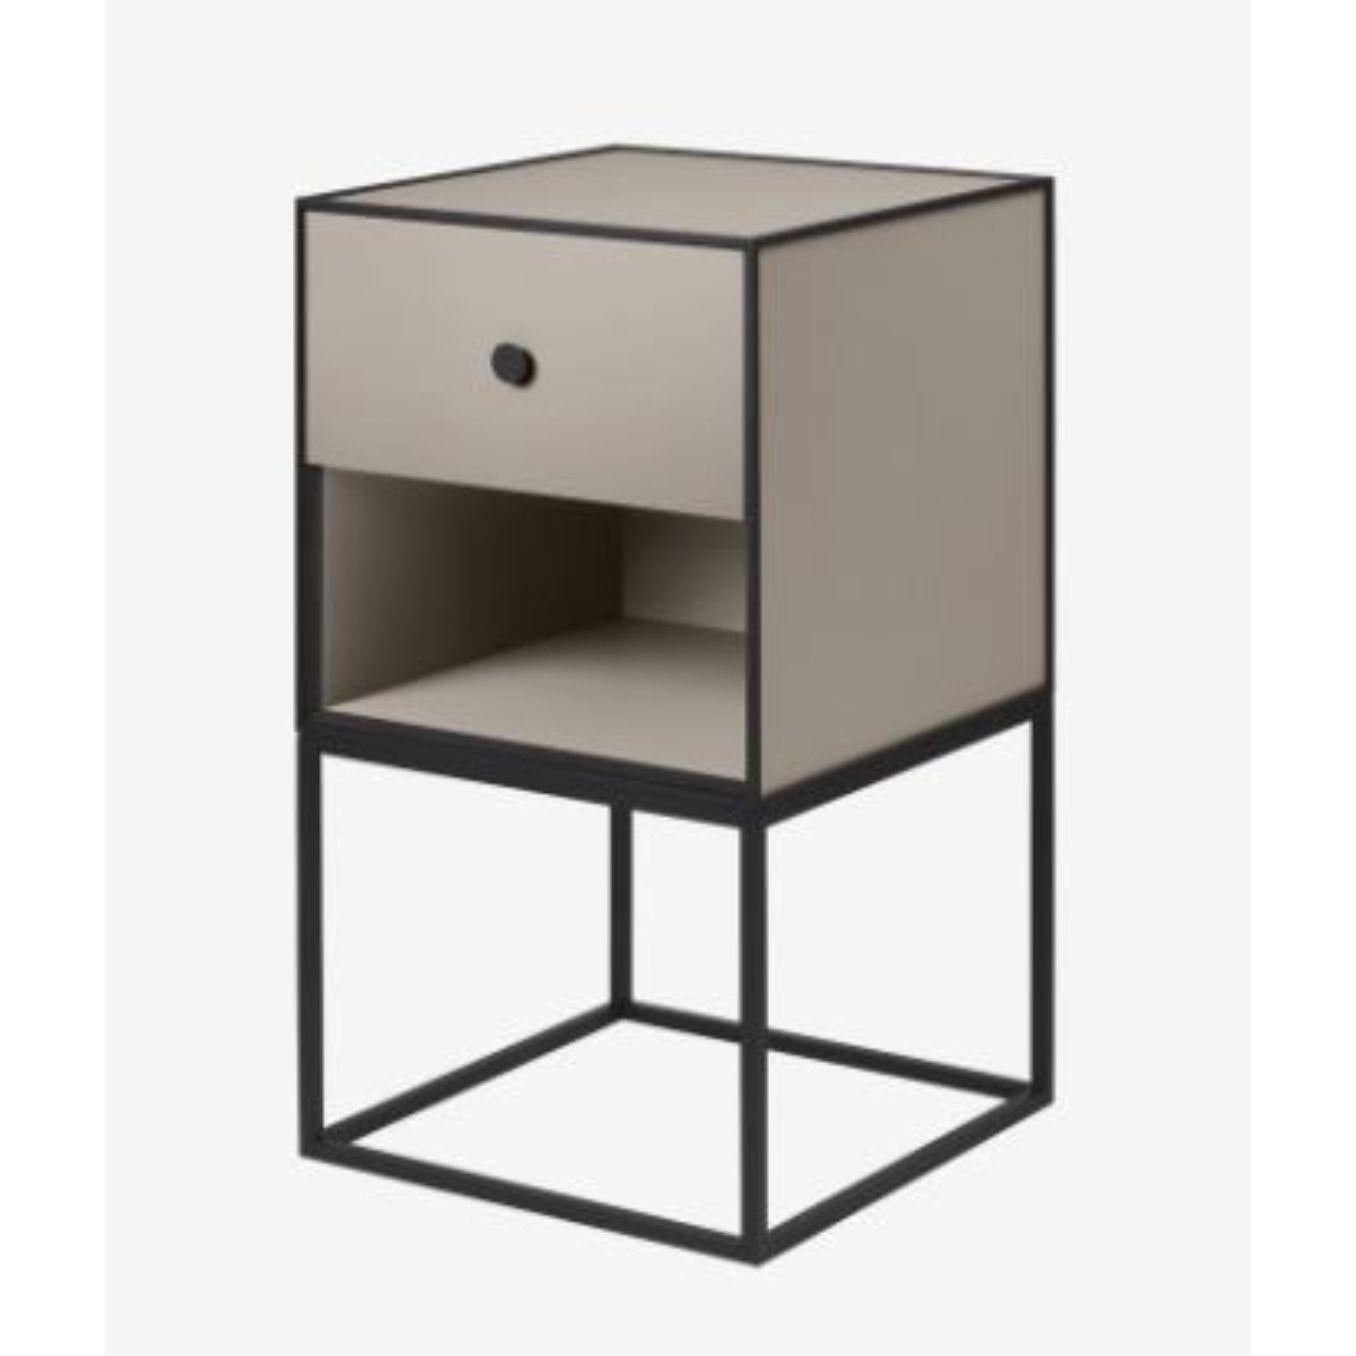 35 sand frame sideboard with 1 drawer by Lassen
Dimensions: w 35 x d 35 x h 63 cm 
Materials: Finér, Melamin, Melamine, Metal, Veneer
Also available in different colors and dimensions. 
Weight: 15.50 Kg

By Lassen is a Danish design brand